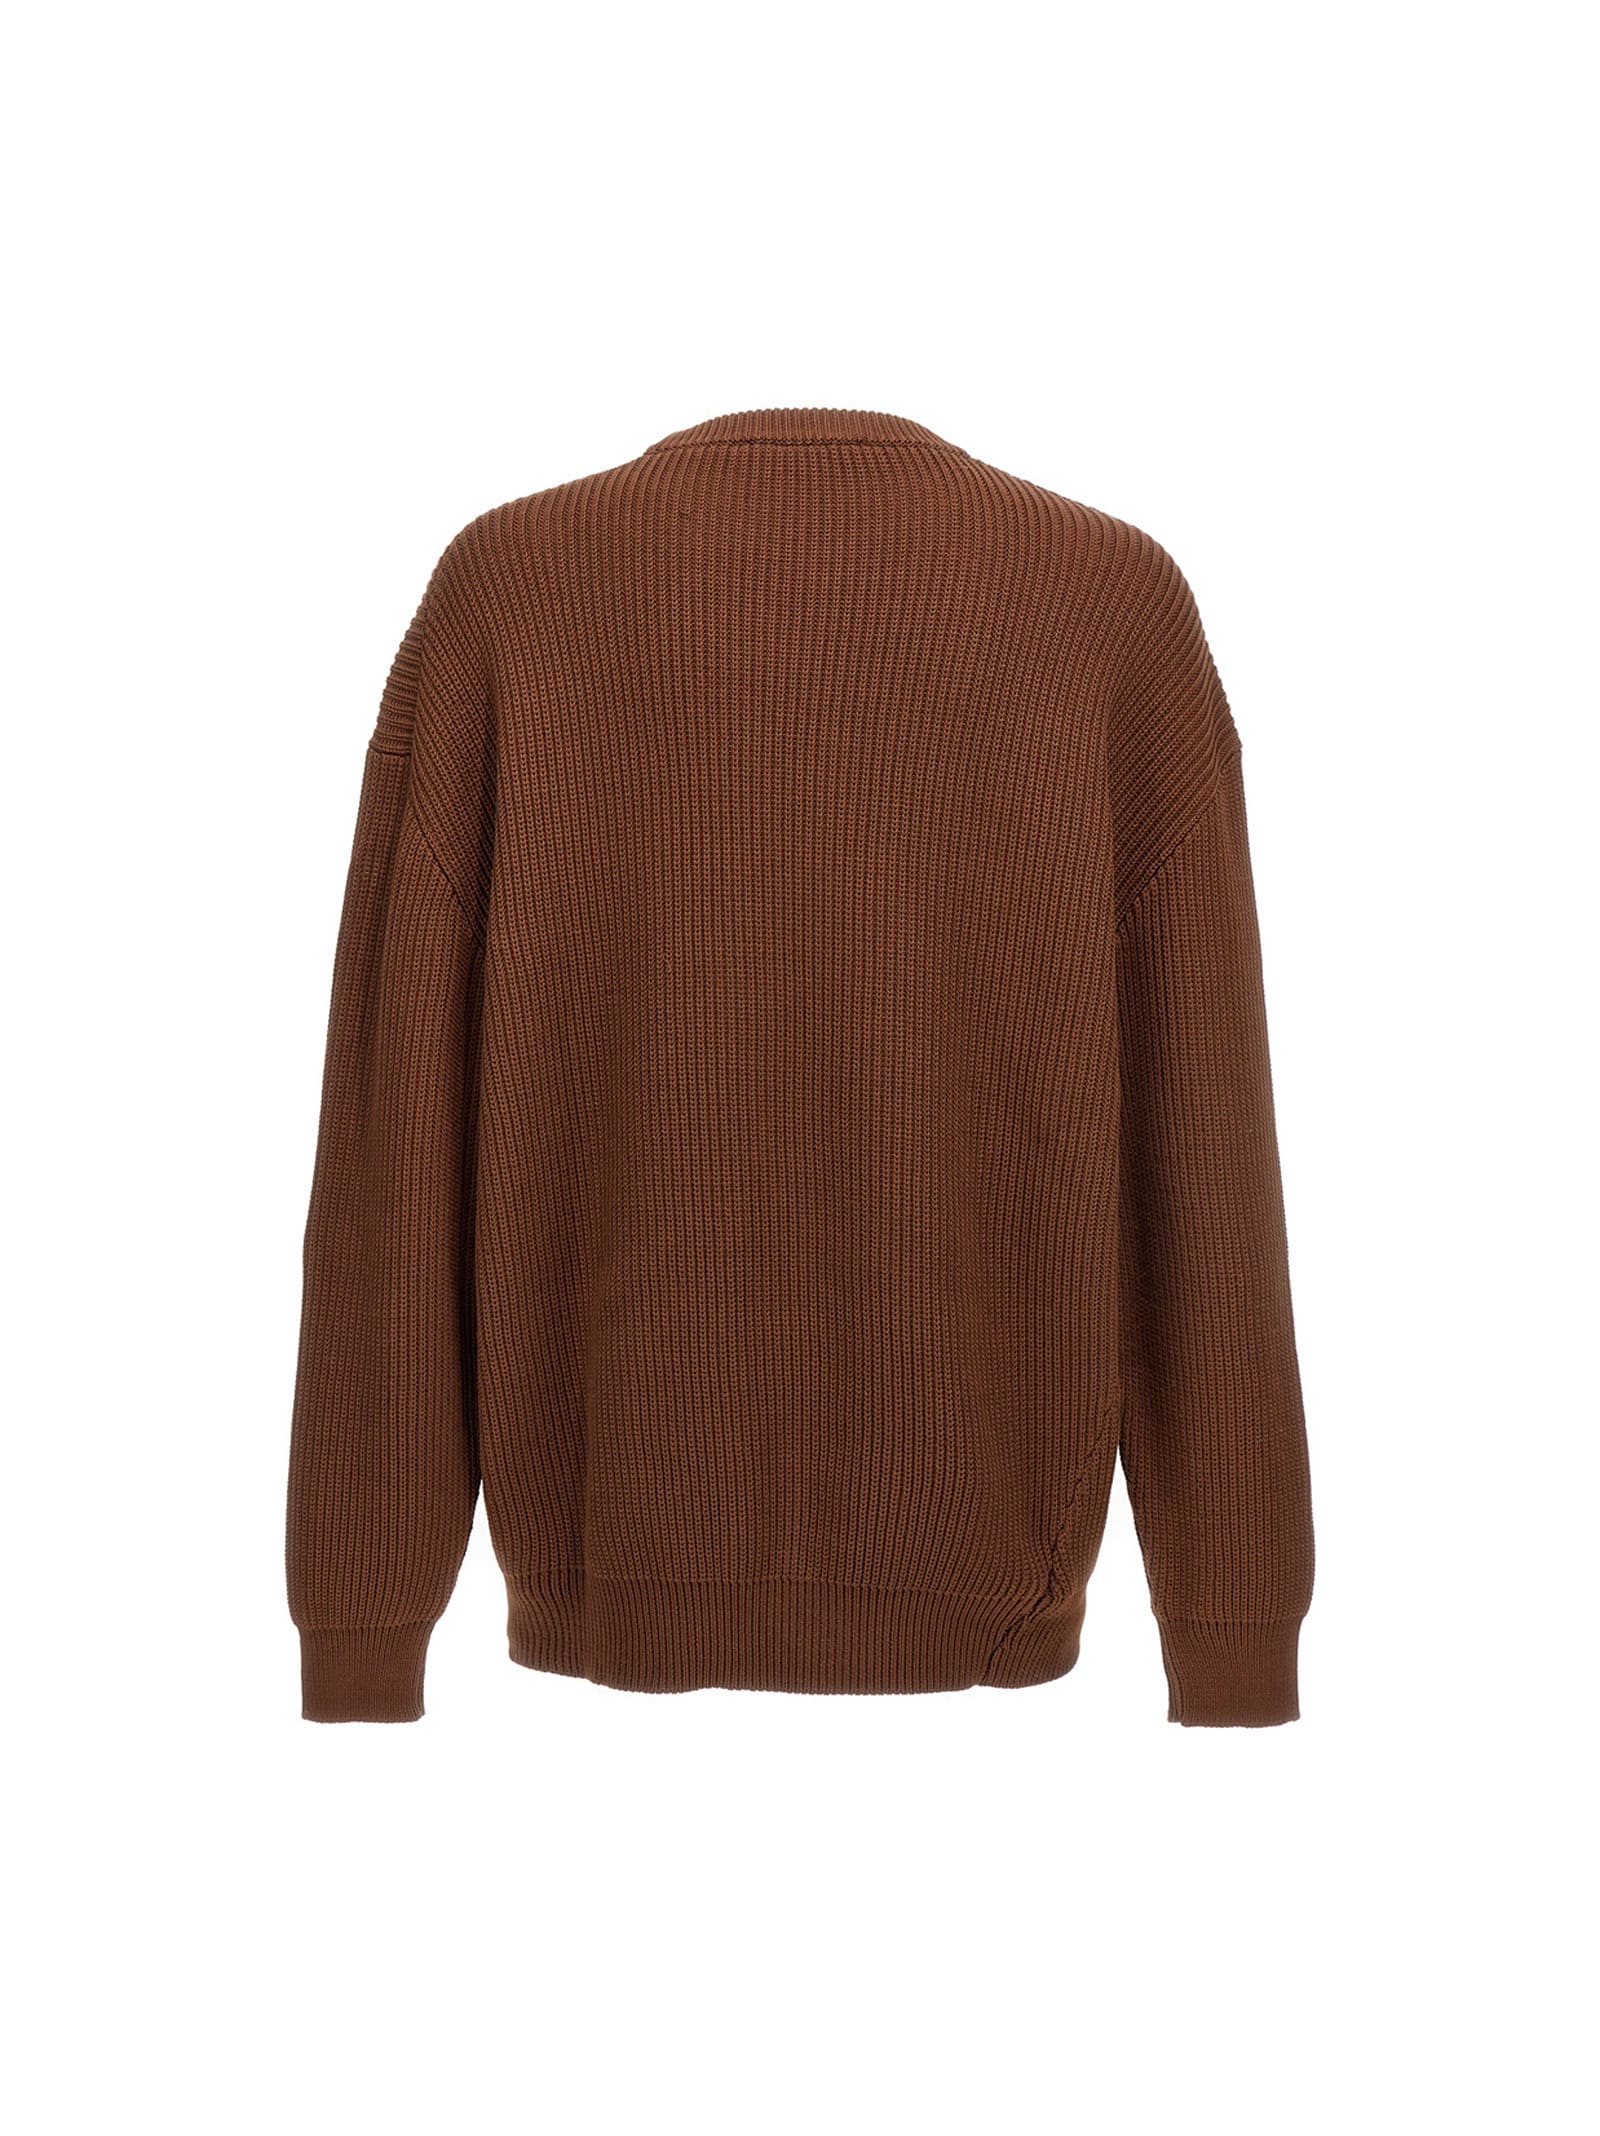 Shop Hed Mayner Twisted Sweater In Brown